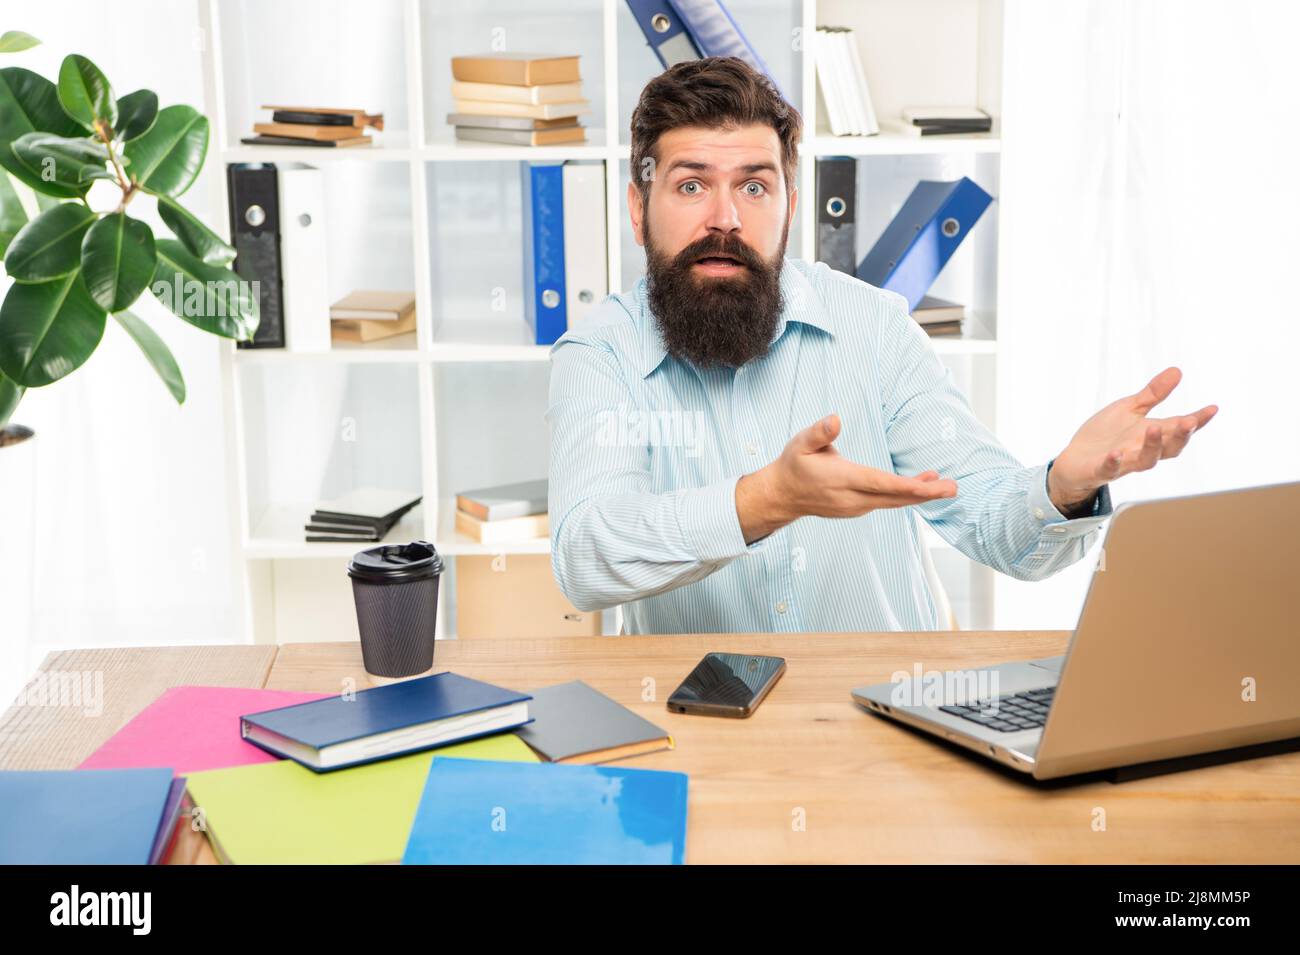 Indignant man complaining while working at work computer in office, indignation. Stock Photo